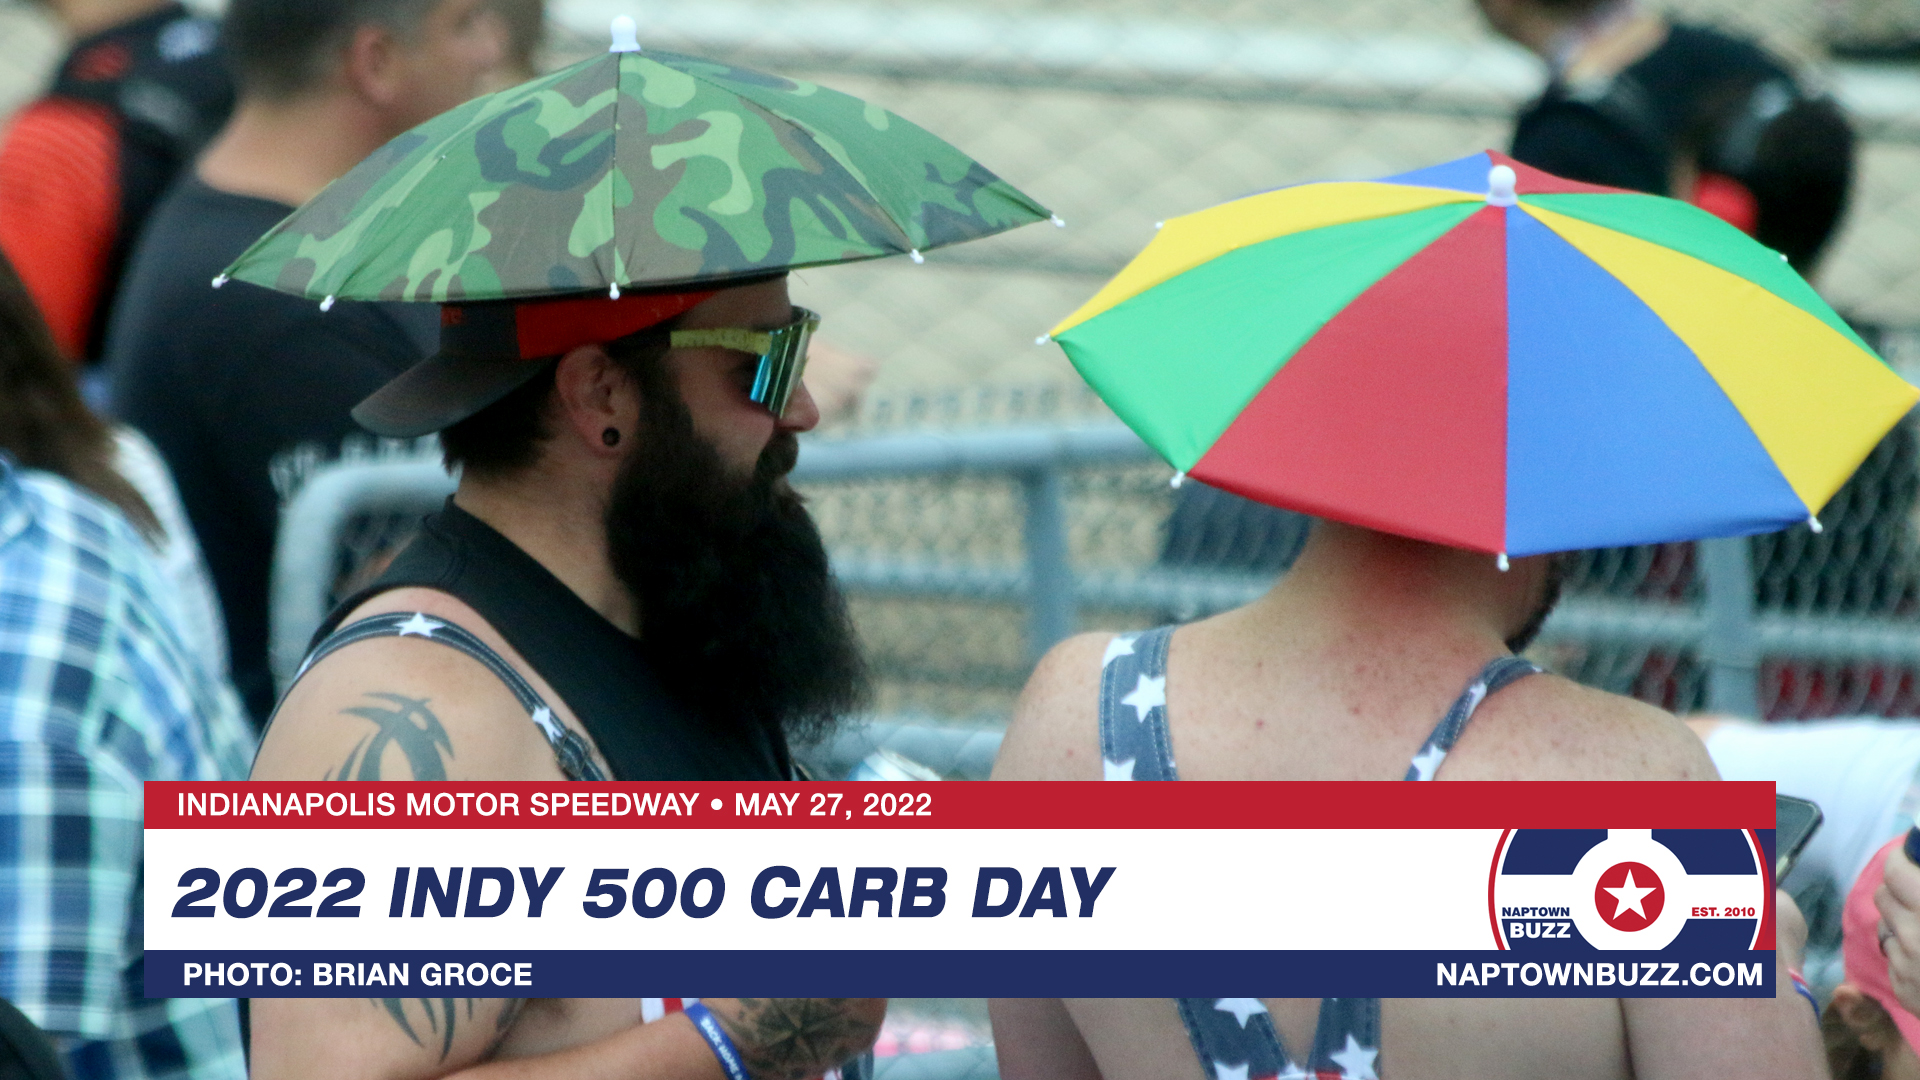 Indy 500 Carb Day May 27, 2022 Fans